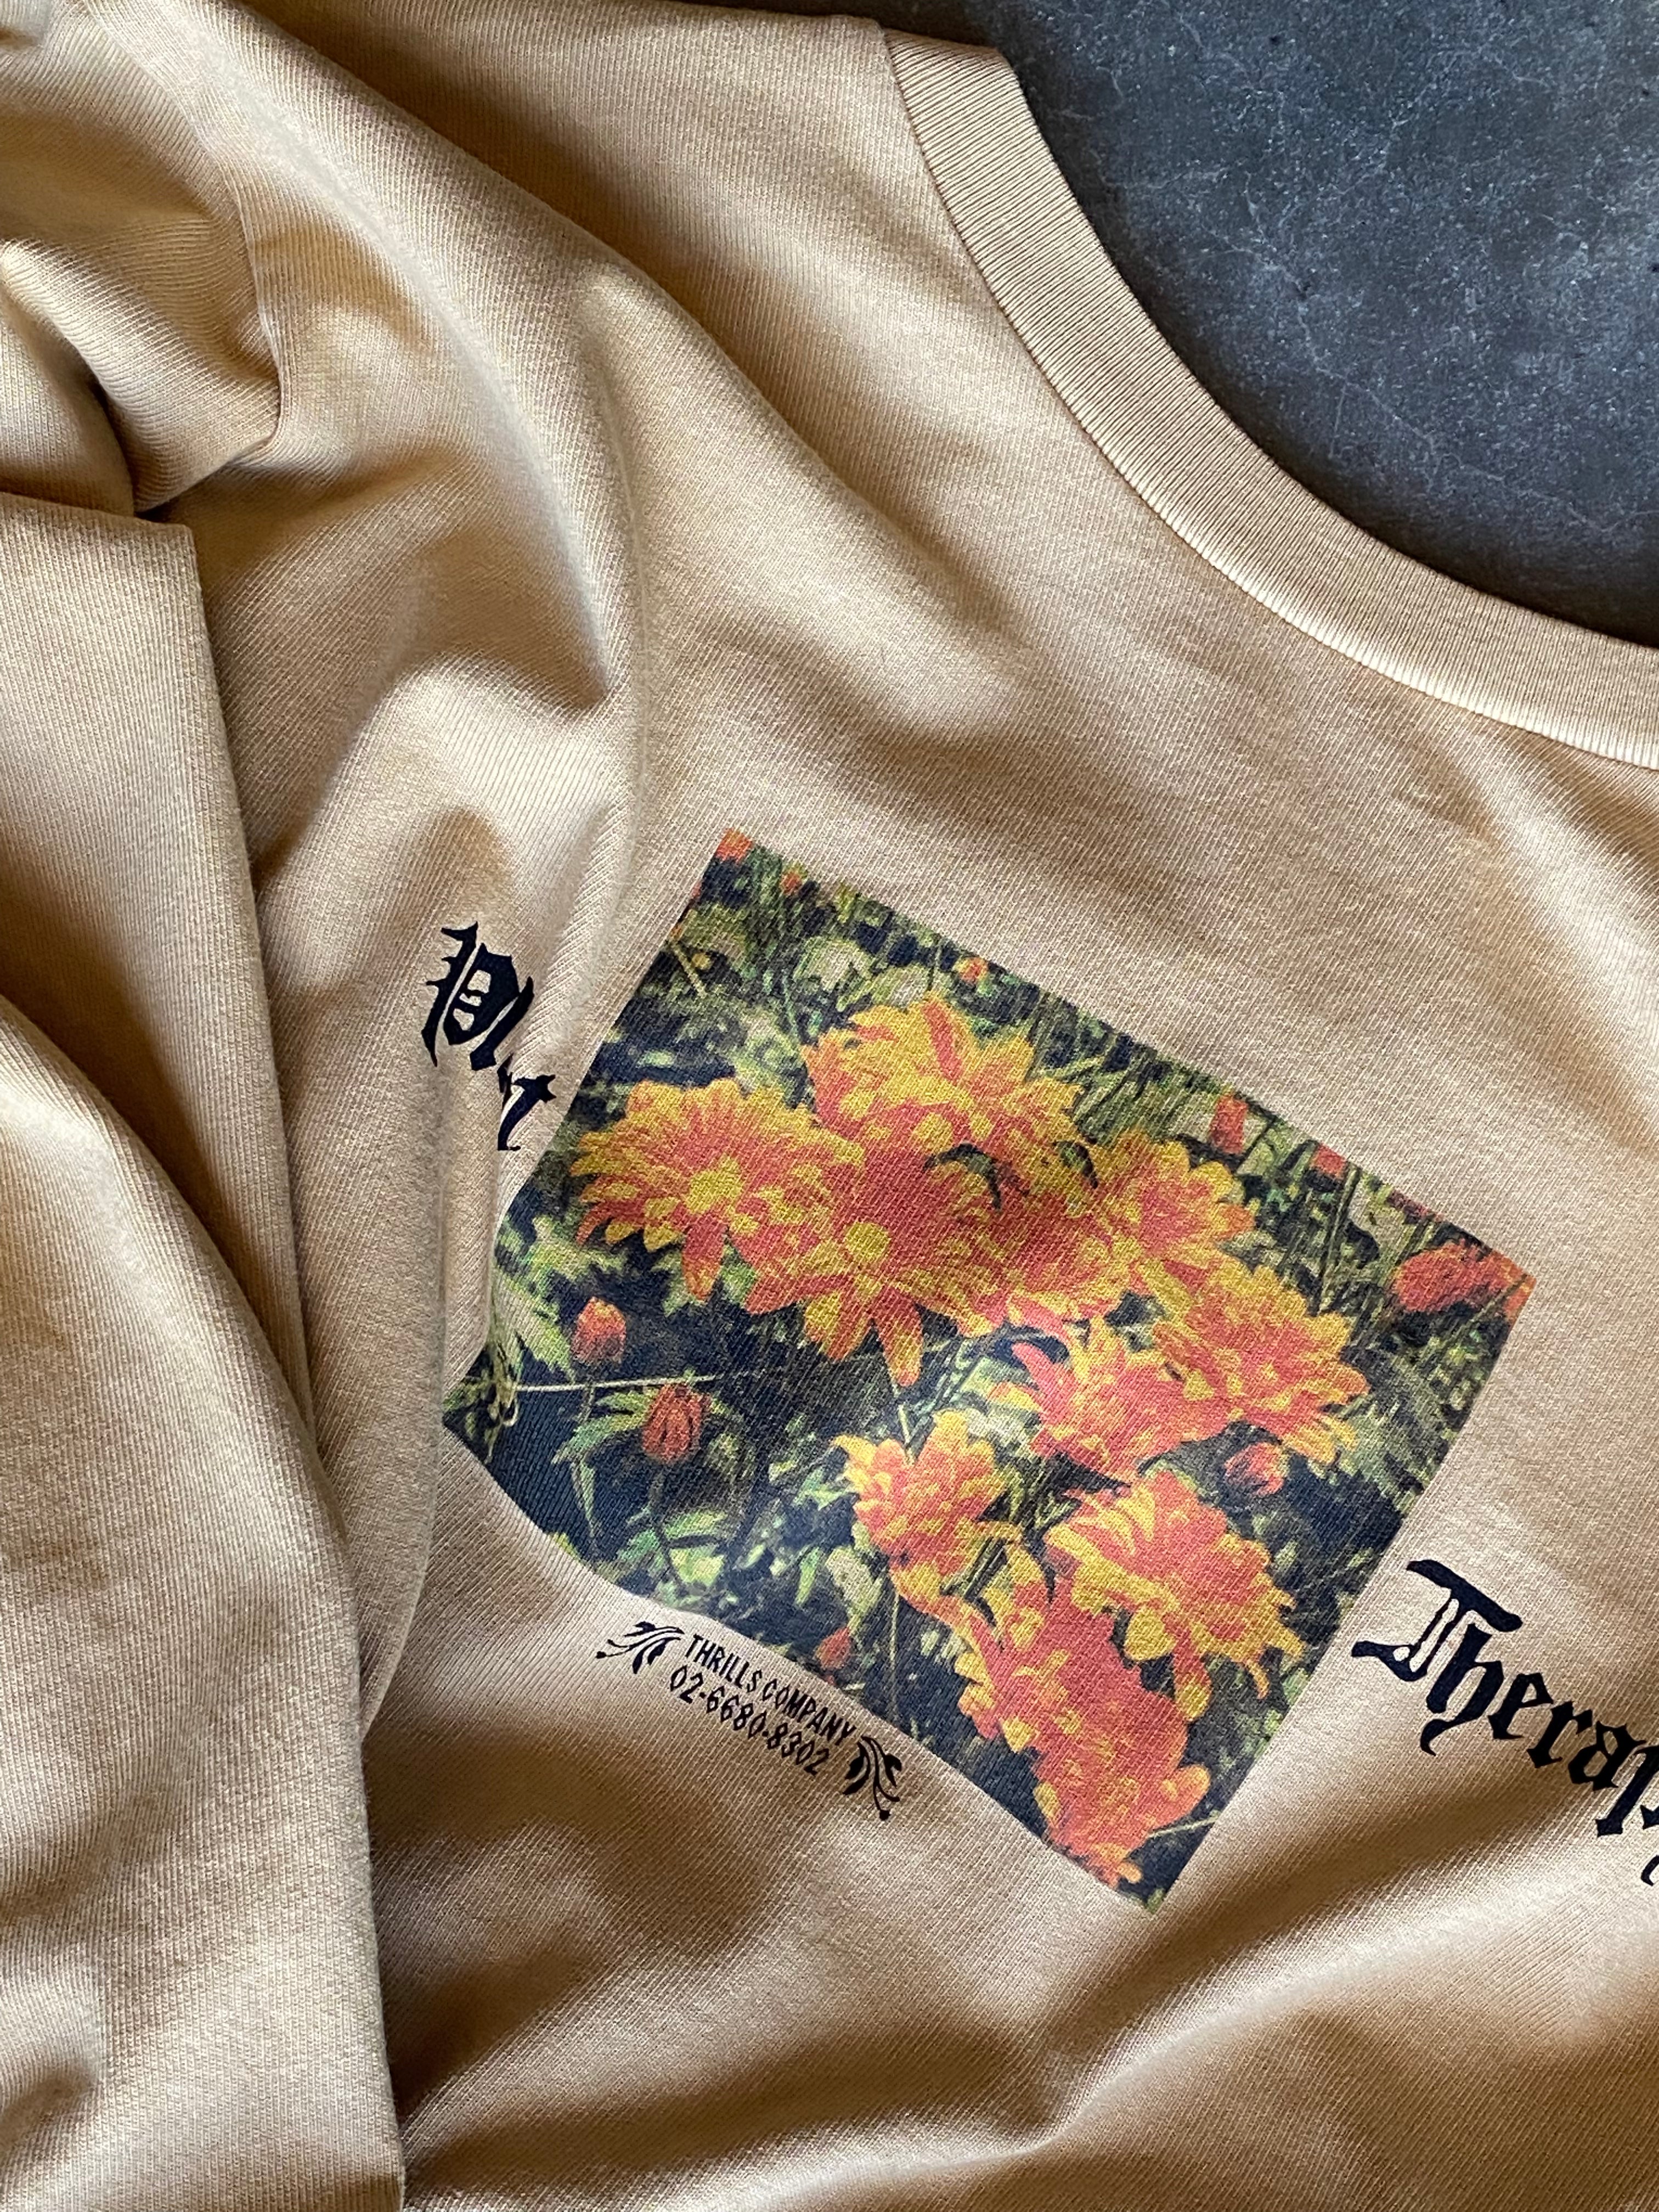 Plant Therapy Merch Fit Tee - Incense